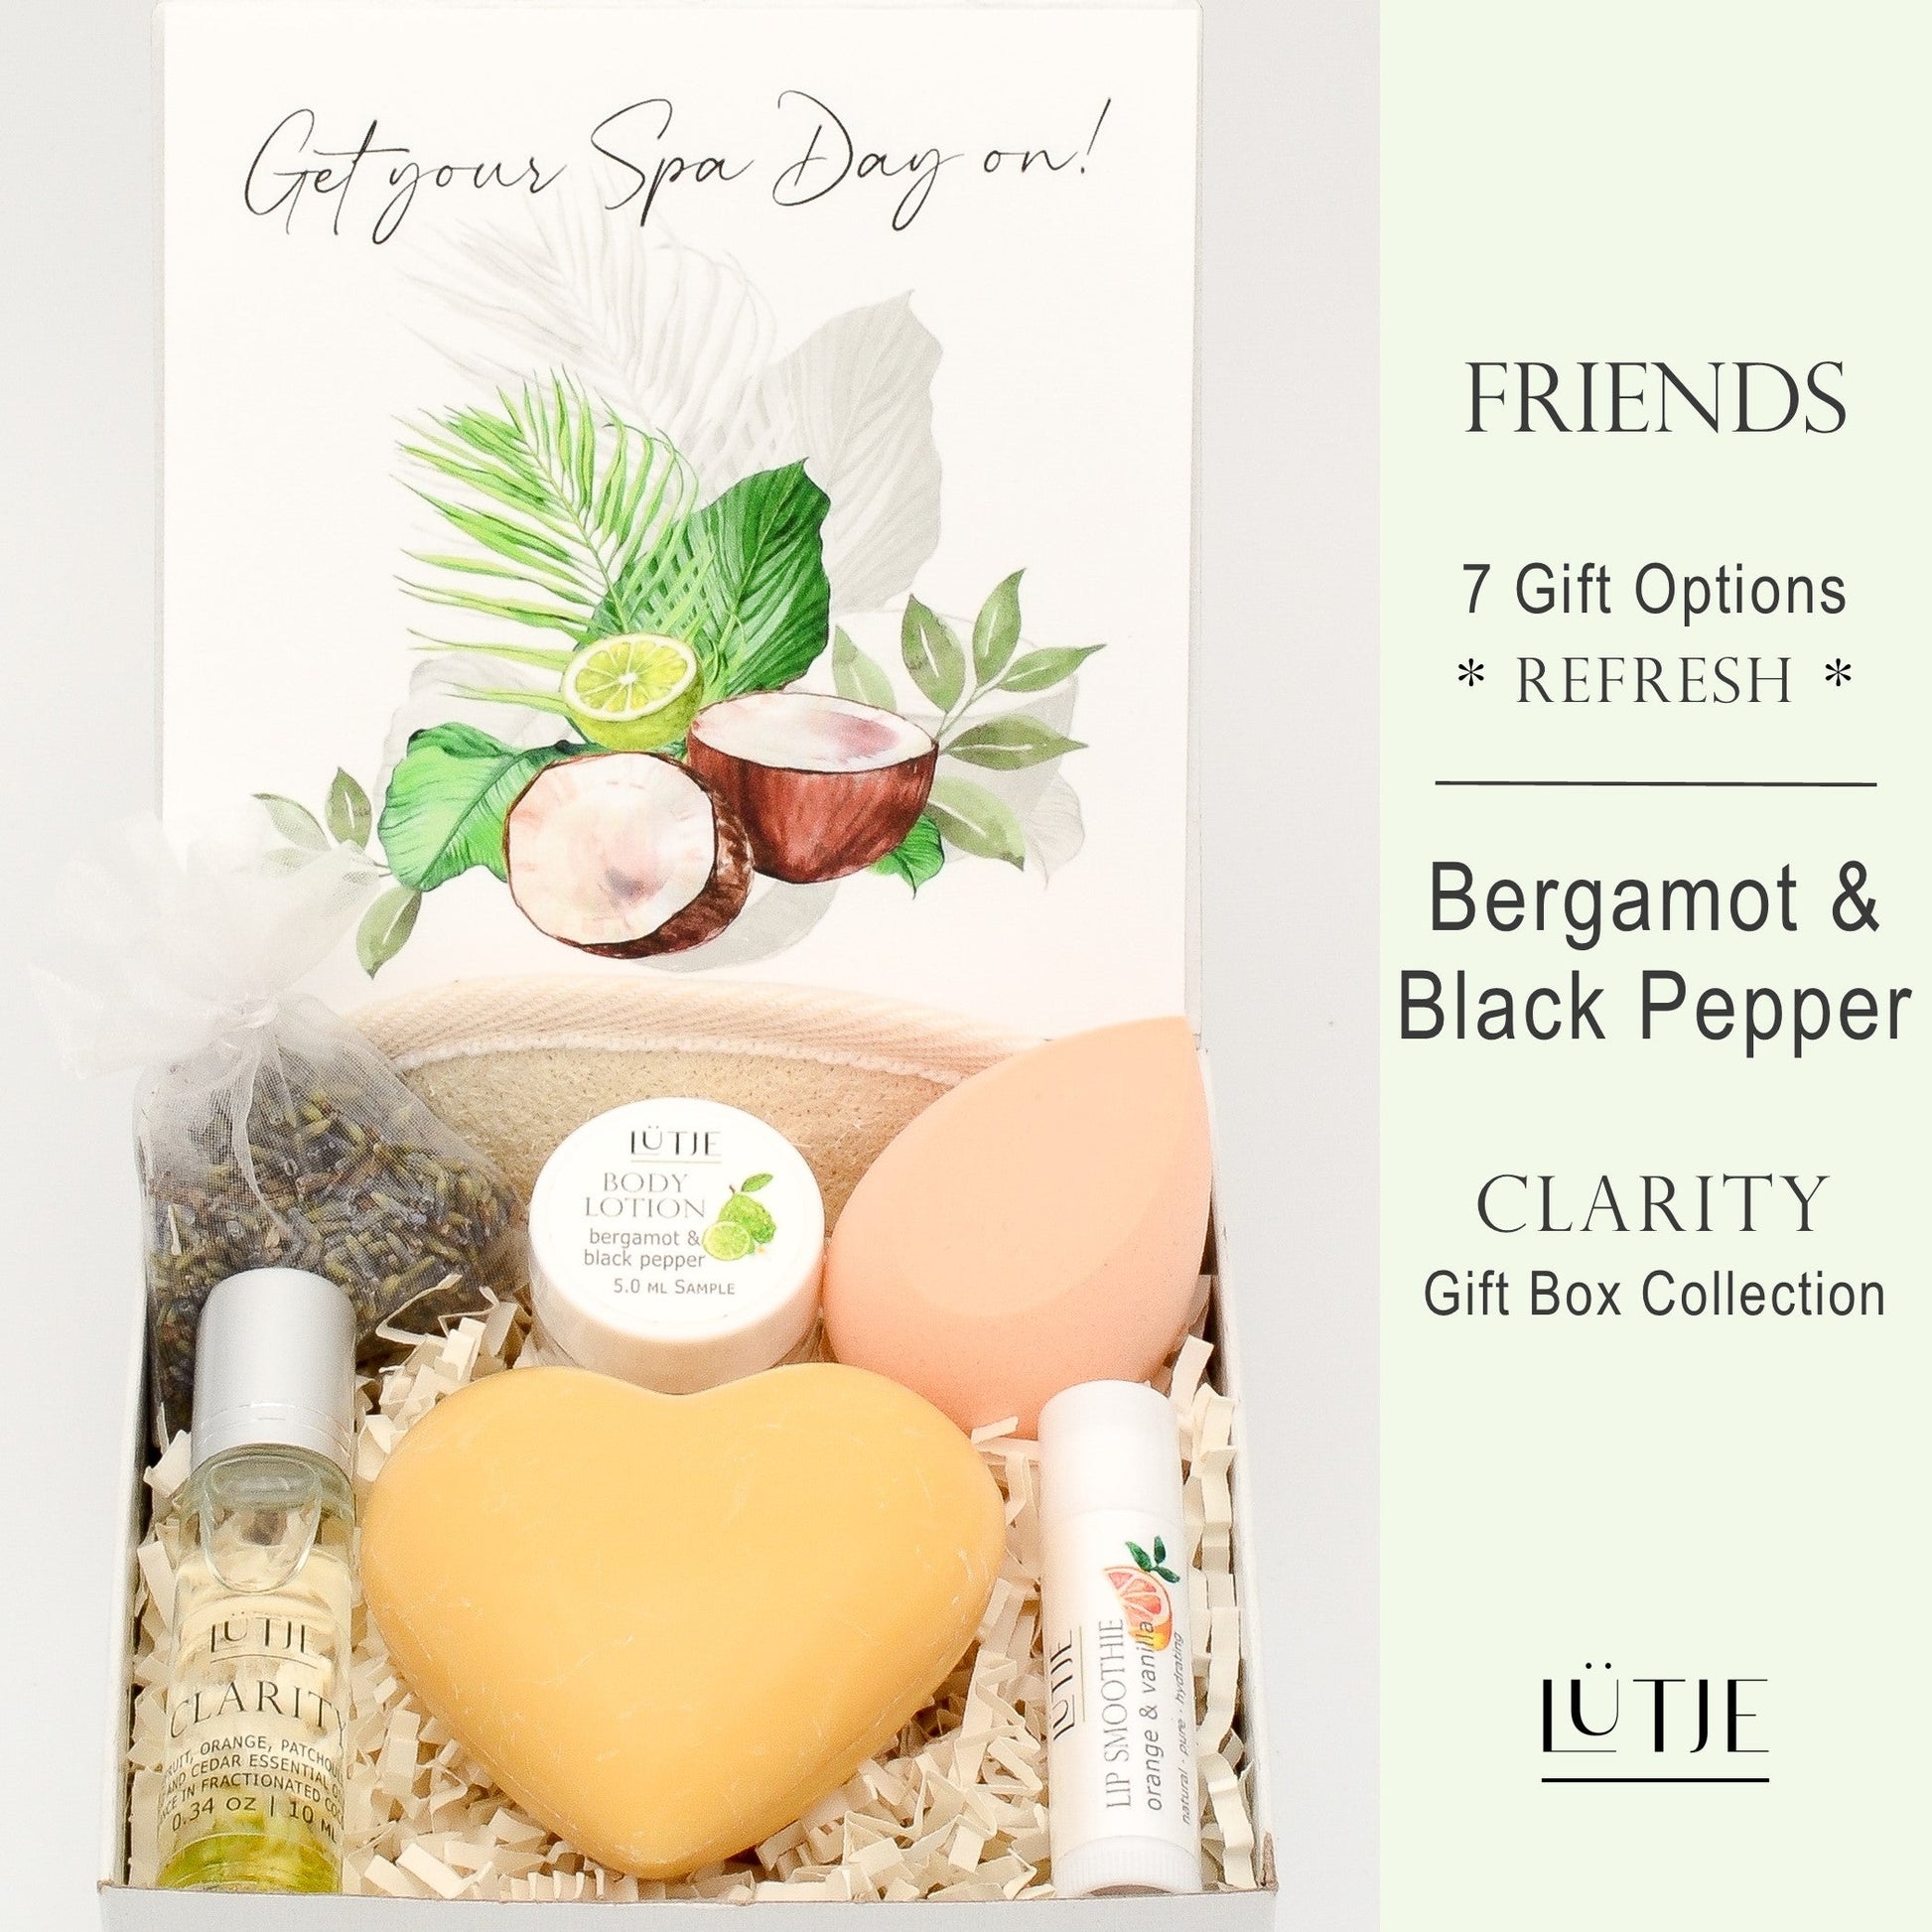 Gift Box for women, wife, daughter, BFF, sister, mom, or grandma, includes Bergamot & Black Pepper hand lotion spray and body lotion, essential oil, lip balm, soothing muscle balm, Lavender & Chamomile room & linen spray, French soap, French bath salts, hydrating face mask, other bath, spa and self-care items, and 18K gold-plated necklace with engraved heart.